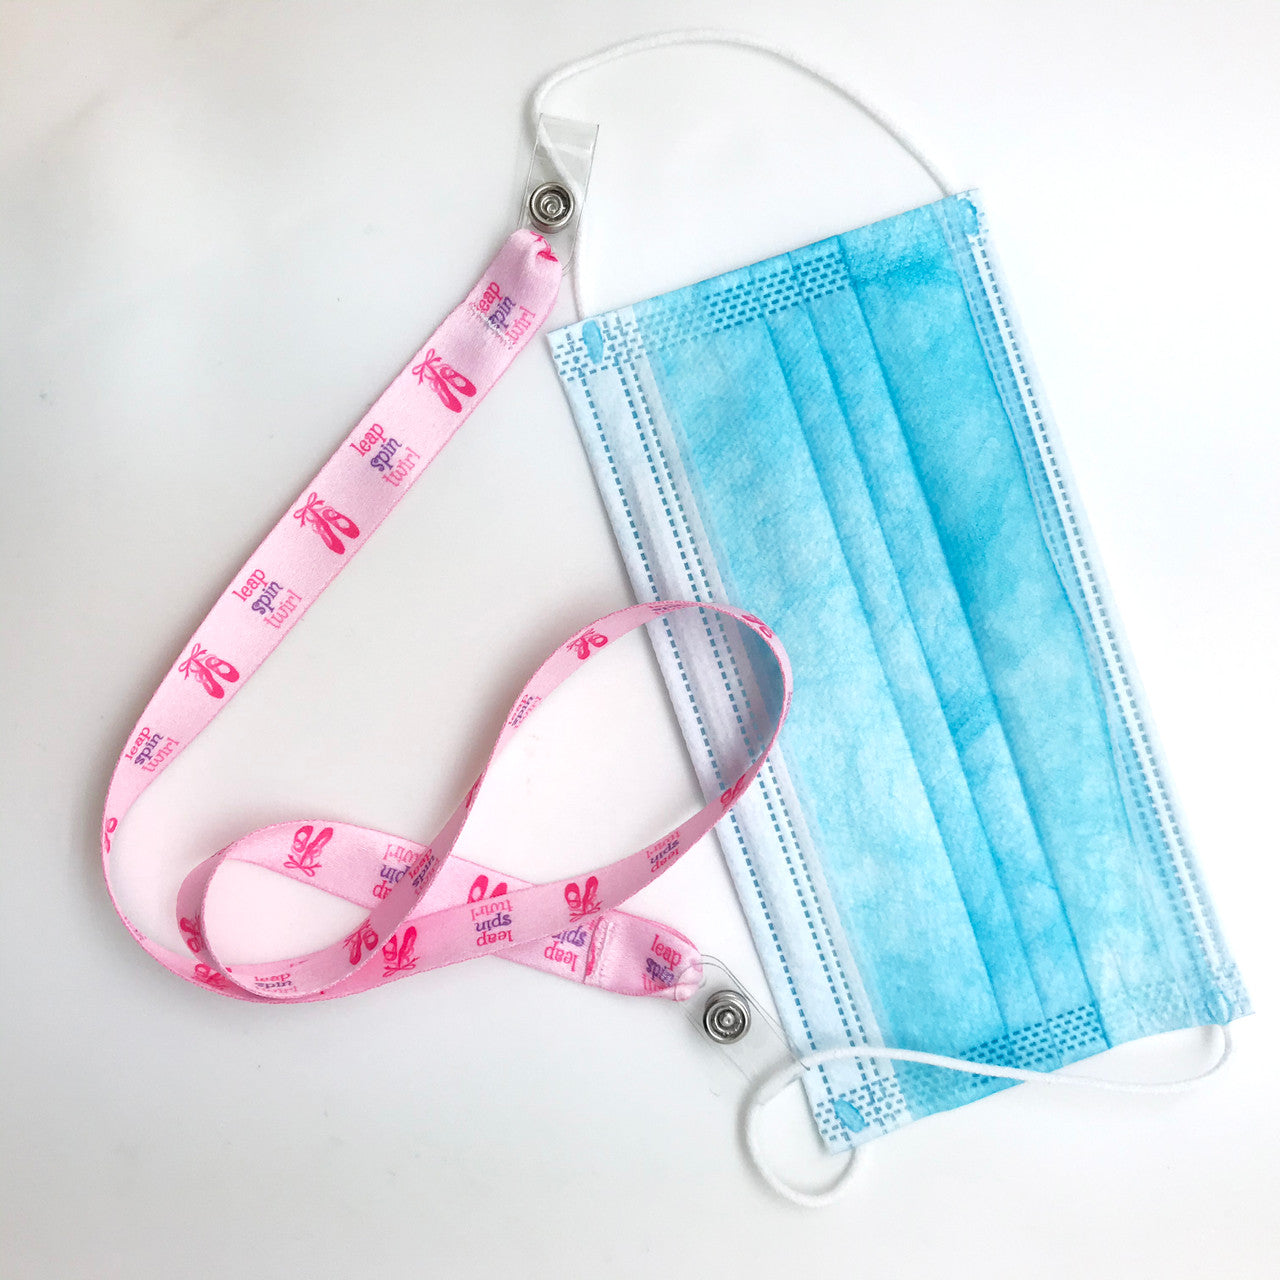 Ballet Theme Face mask holder lanyard 24" long in with vinyl  snap fittings printed on 5/8" Ultra Lanyard fabric